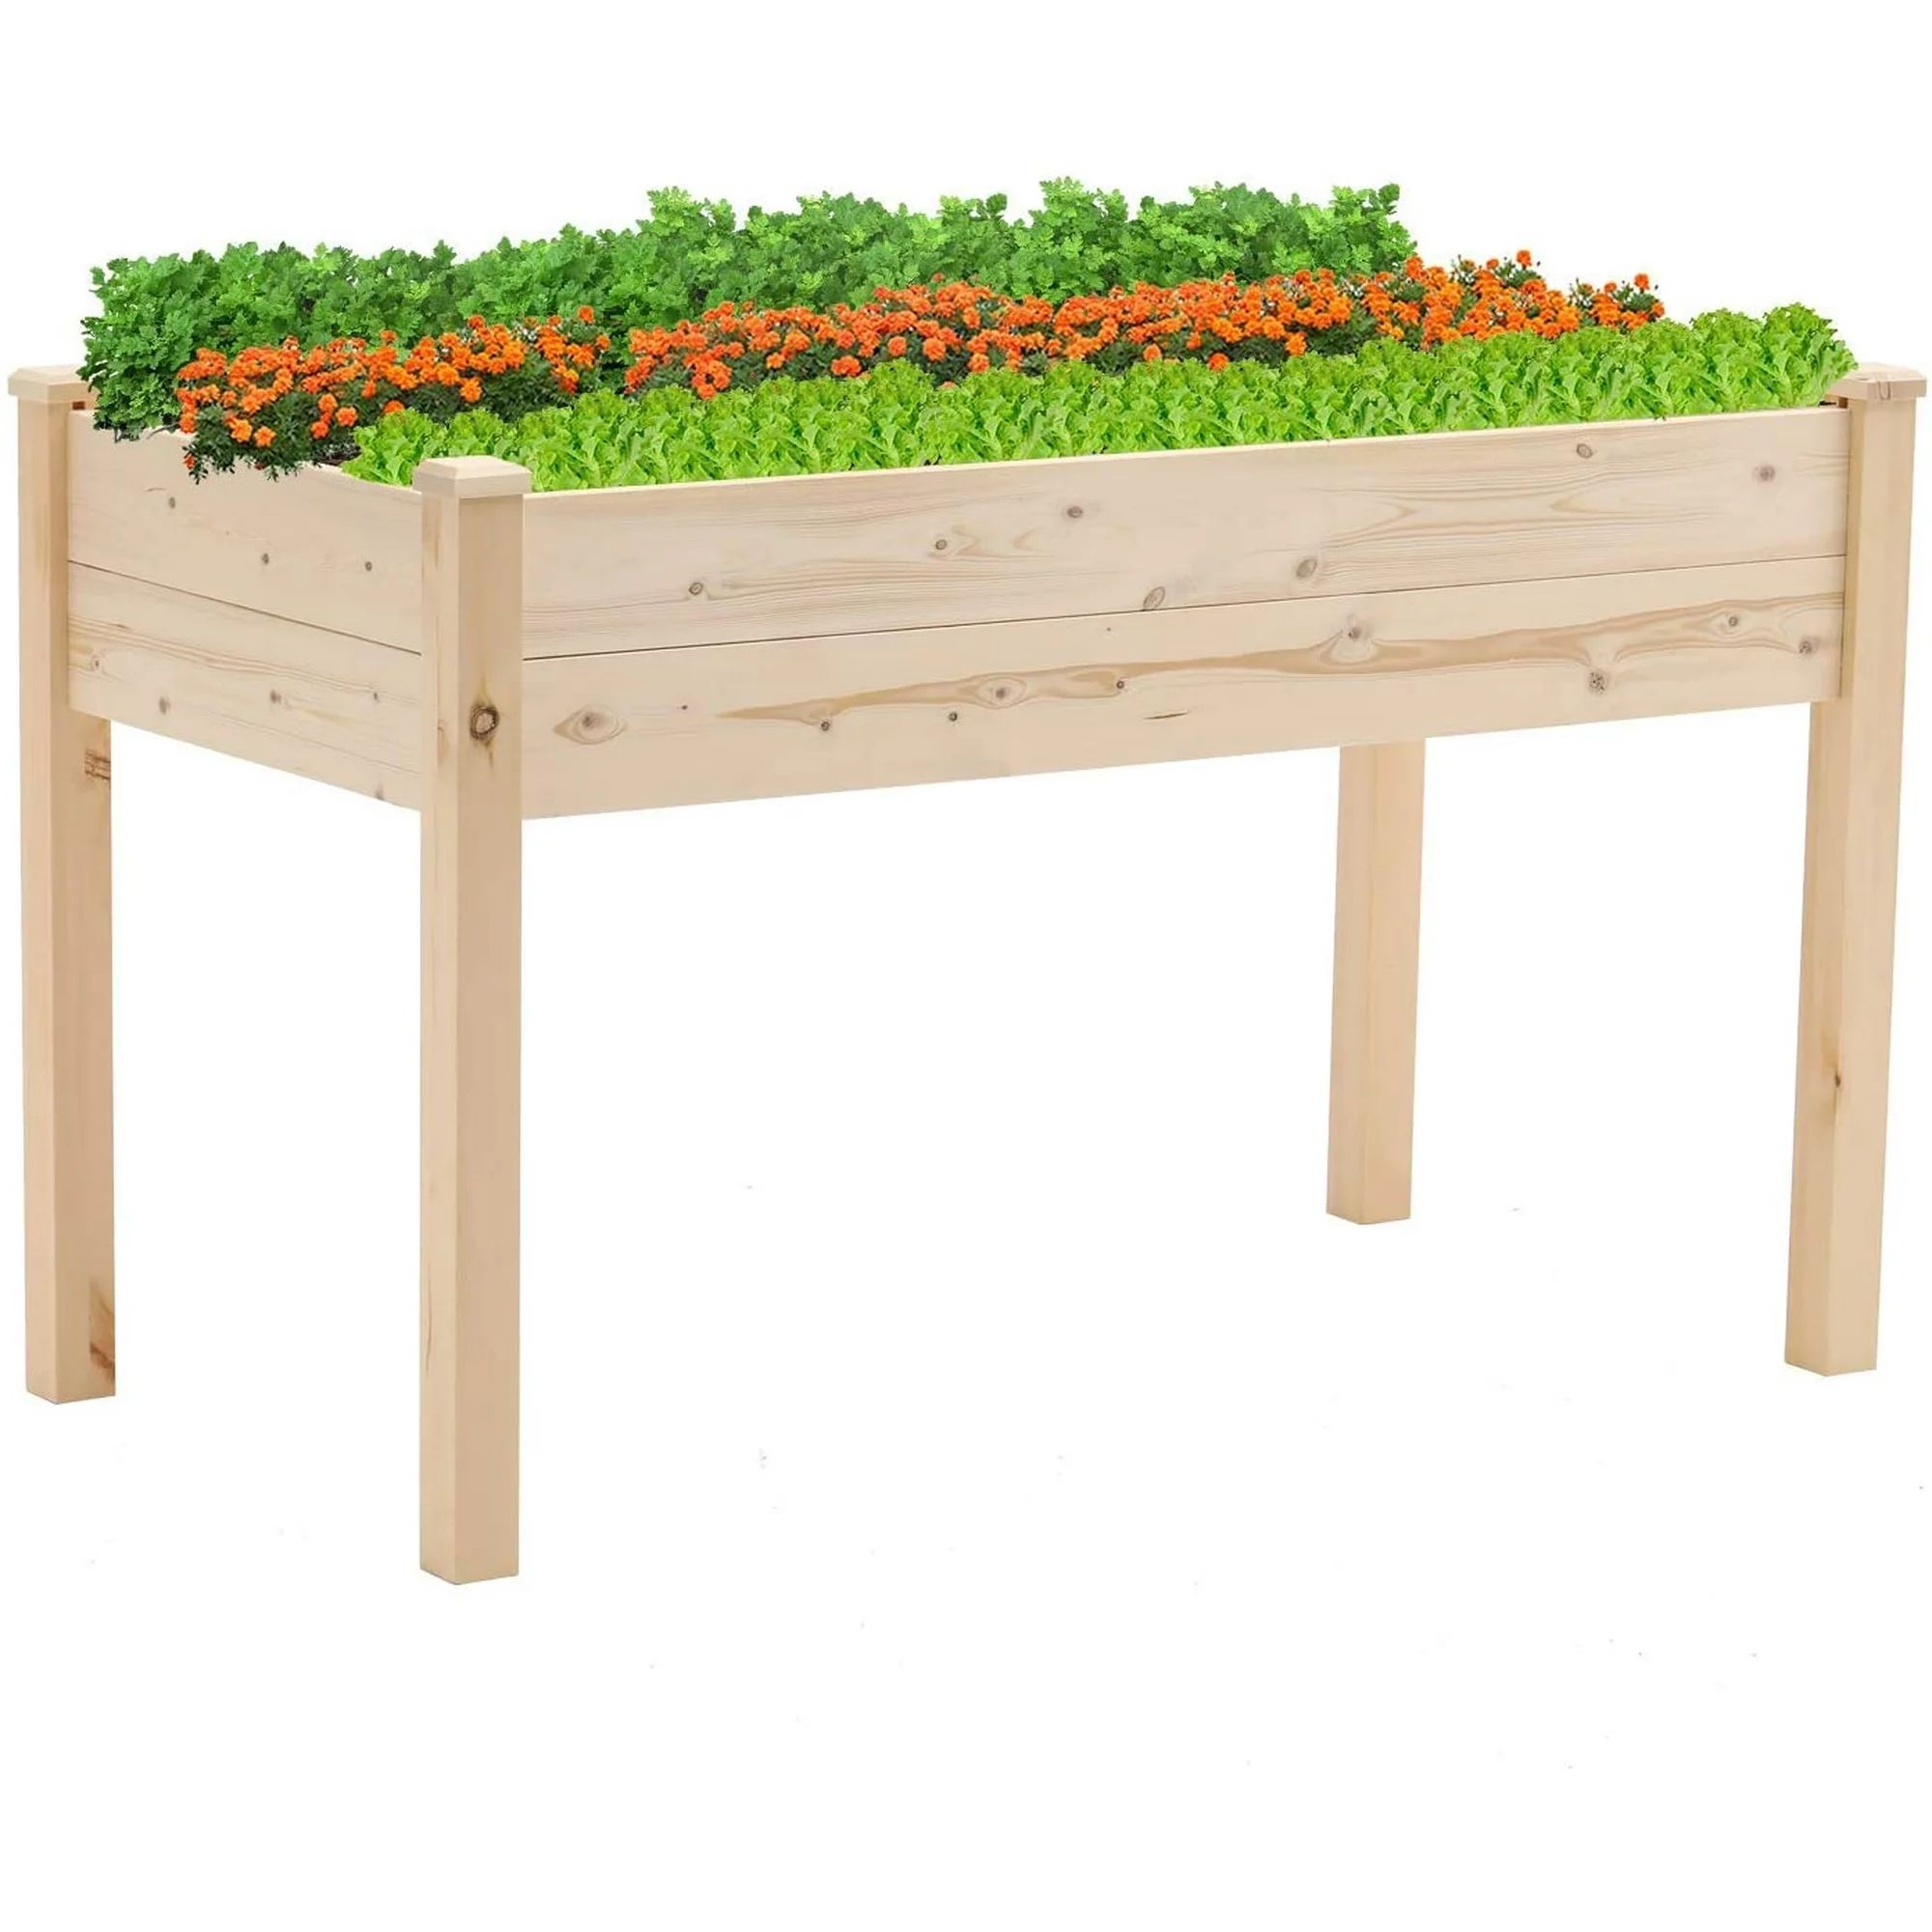 SUNCROWN 4ft Elevated Raised Garden Bed Wood Planter Box Stand for Backyard, Patio - Natural | Walmart (US)